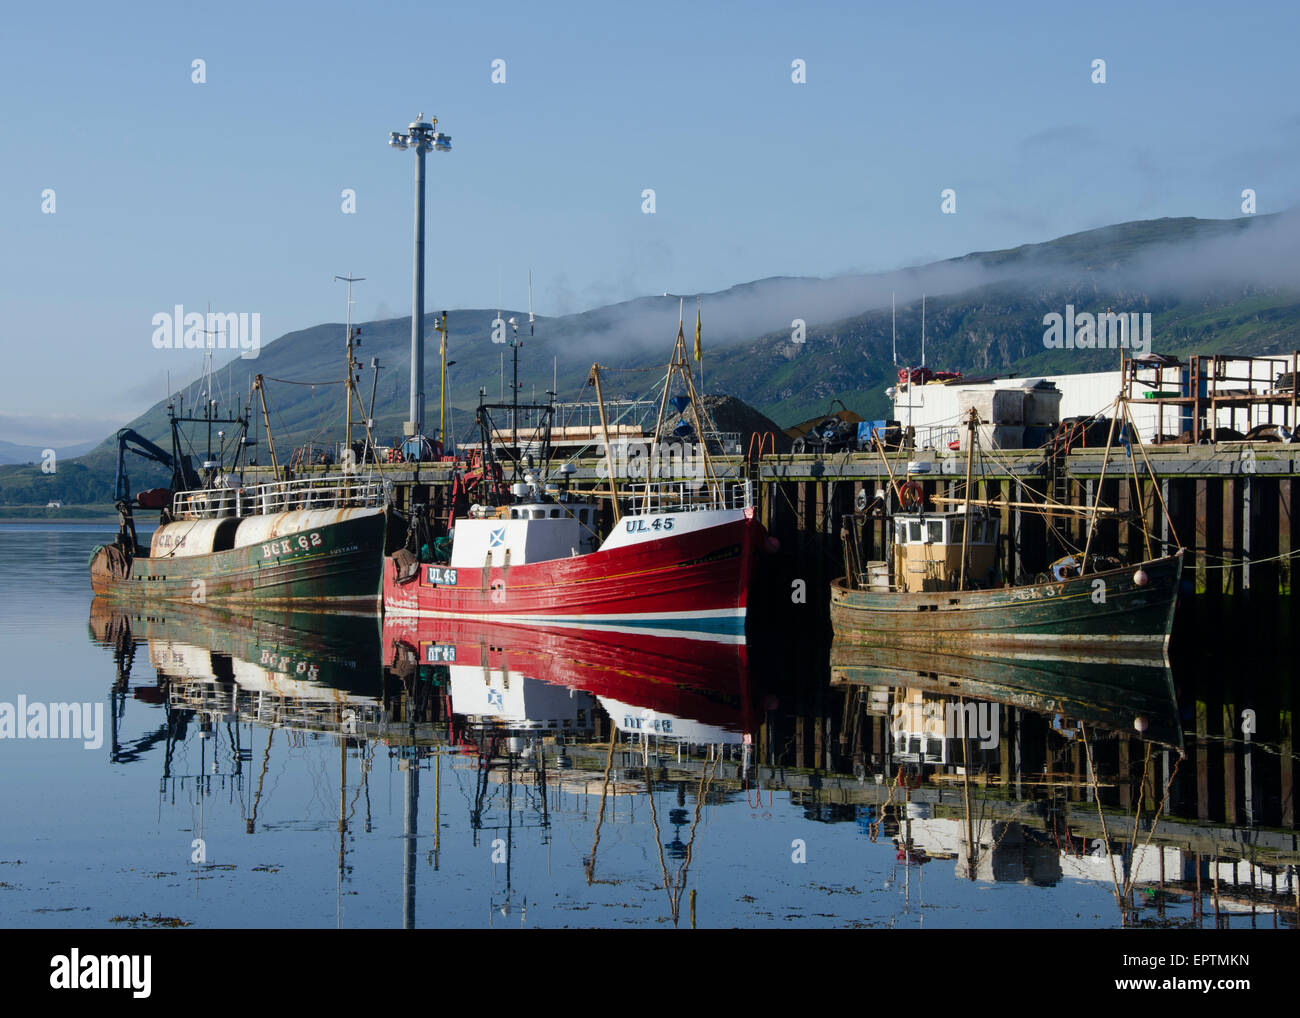 Fishing vessels reflecting in the waters of Ullapool harbor in the Scottish Highlands. Stock Photo